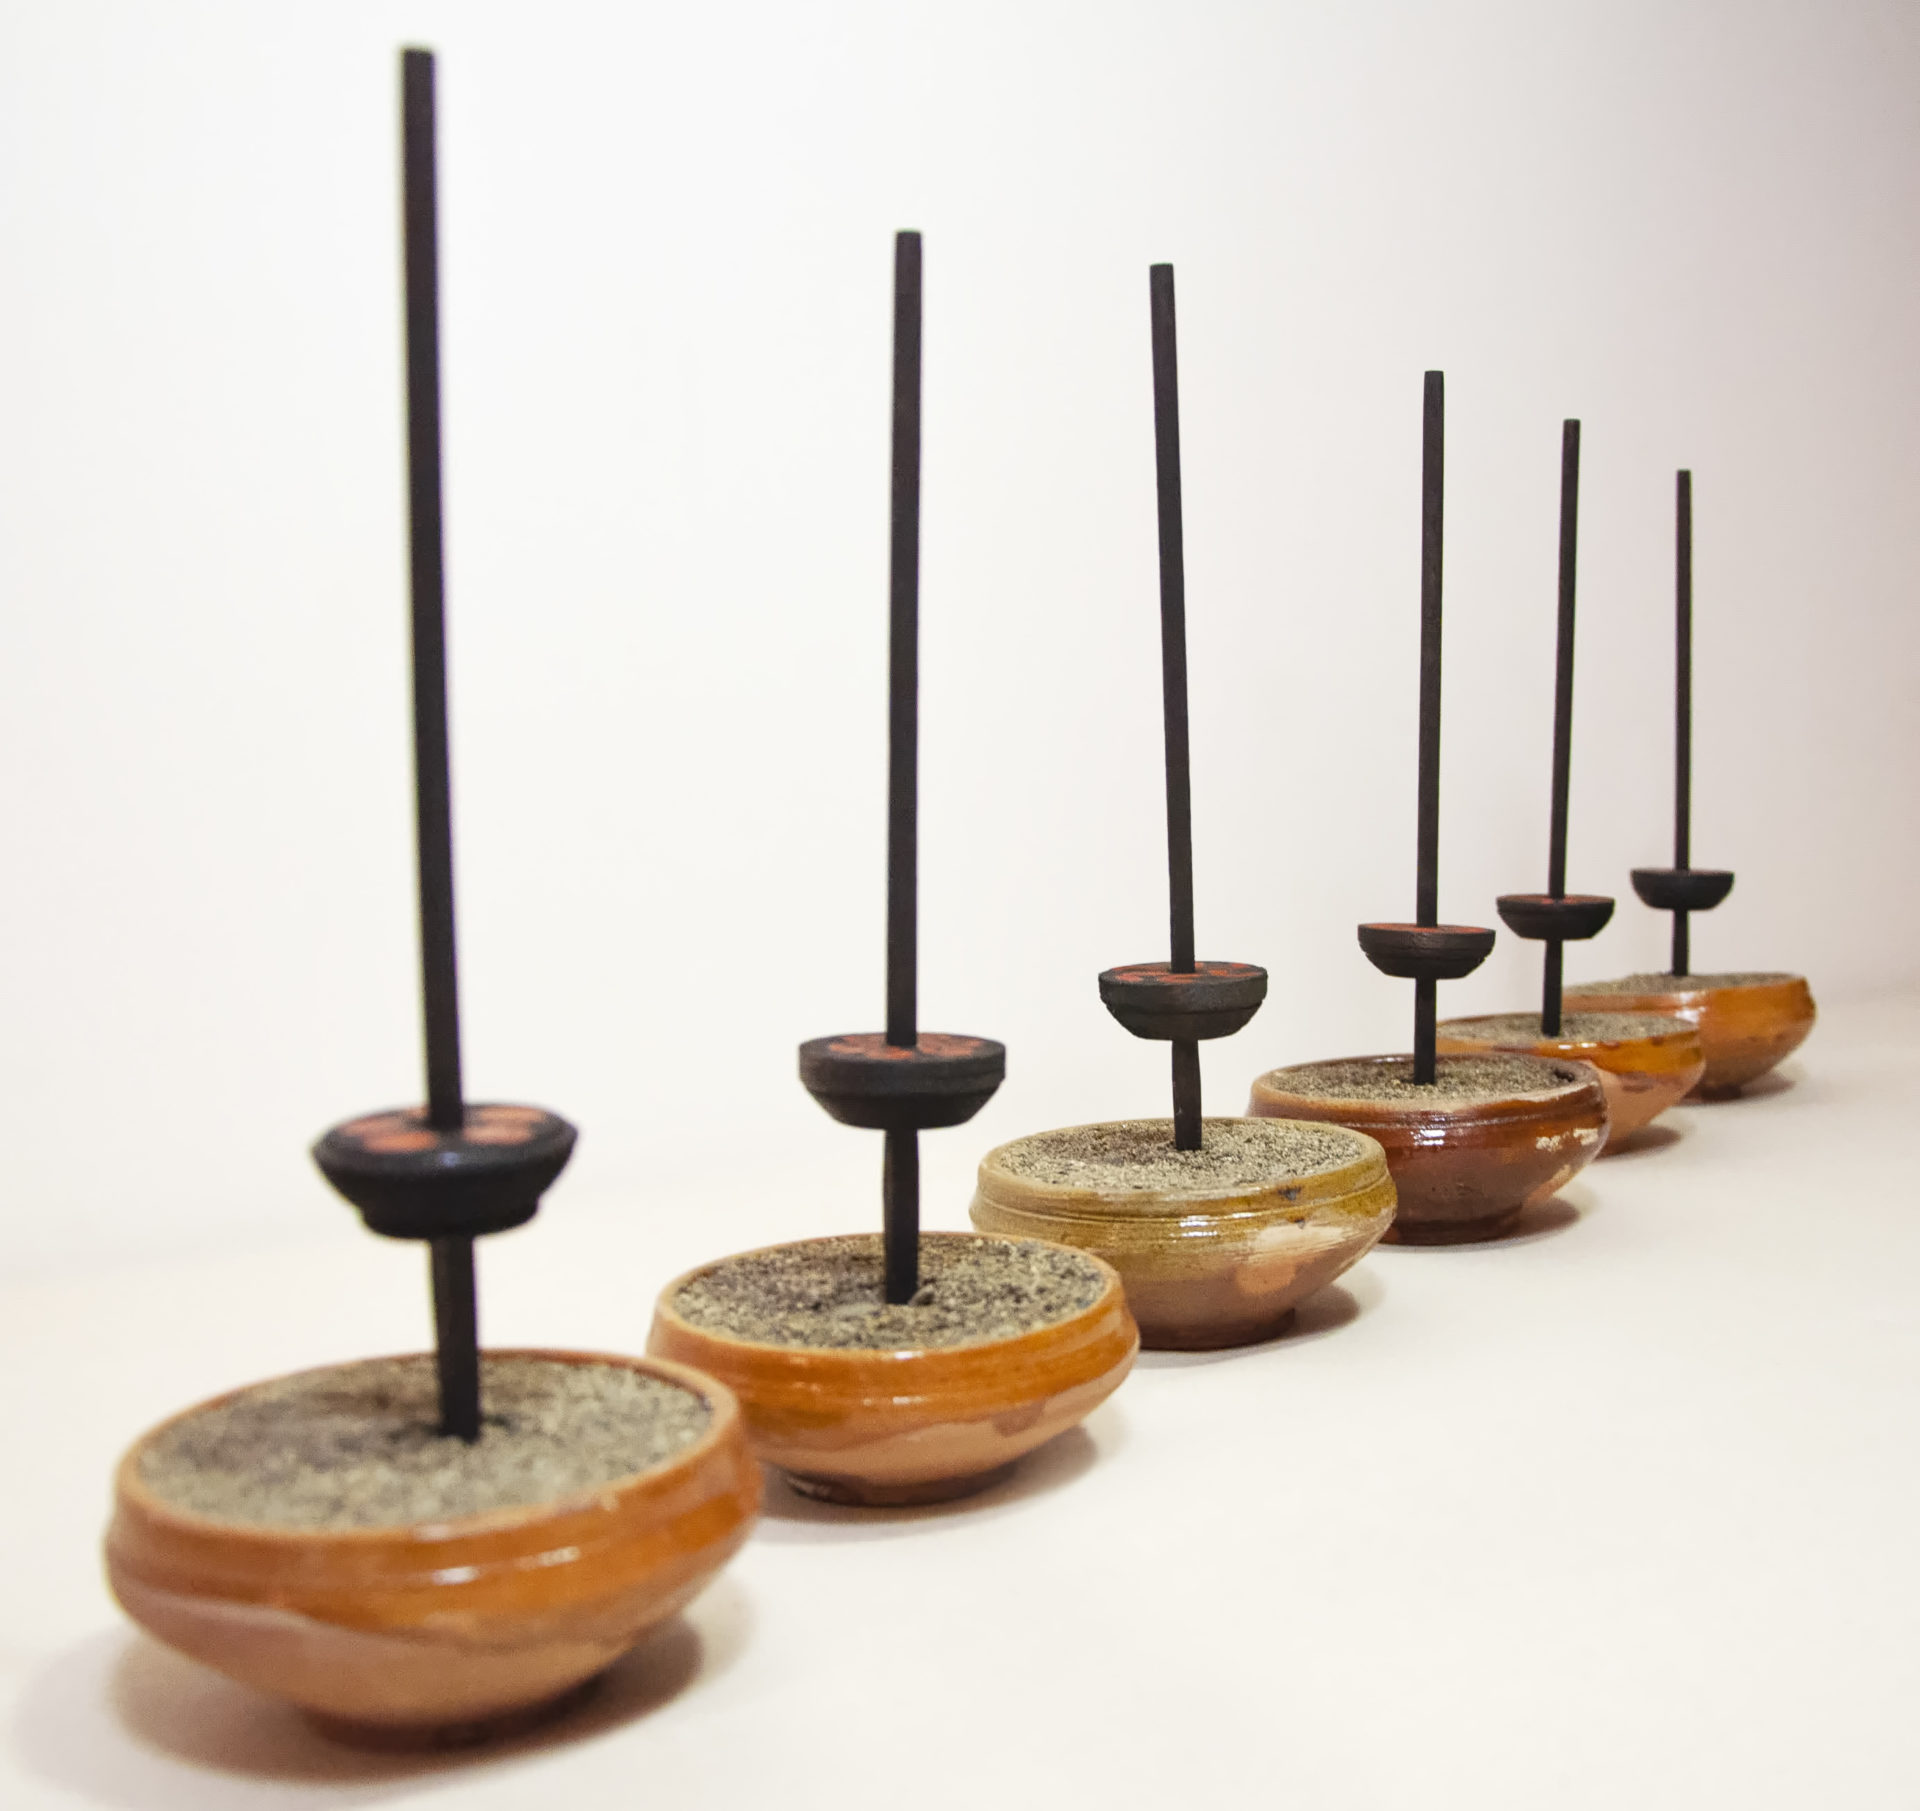 [Description: Six small wooden bowls lined up on a right diagonal angle leading from foreground to the white background, each filled with sand. One black, wooden rod in the center of each bowl. Near the base of these rods are threaded wooden bearings.] 